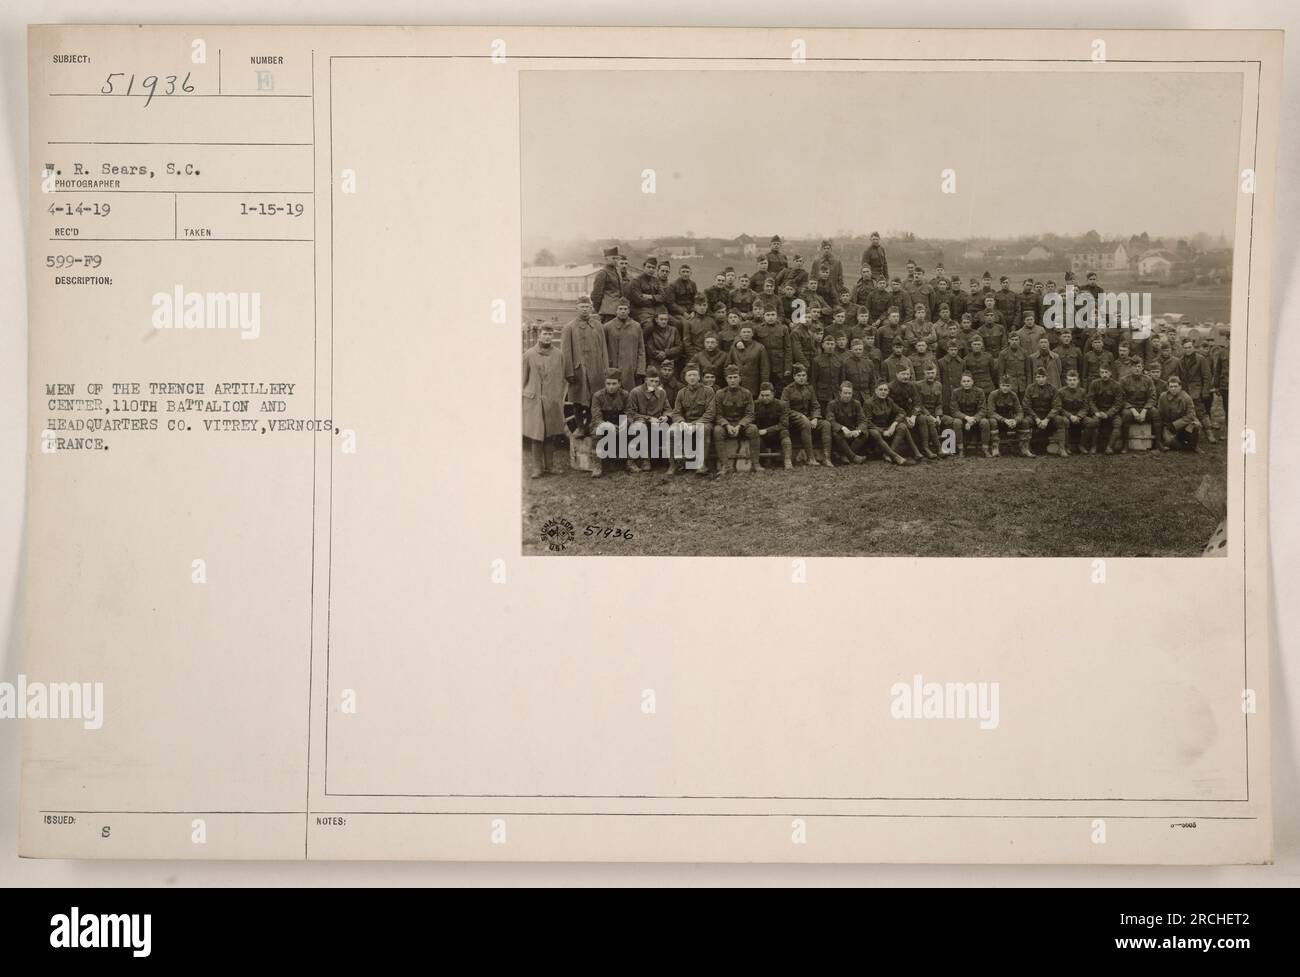 Men of the Trench Artillery Center, 110th Battalion, and Headquarters Co. at Vitrey, Vernois, France. This photograph was taken on April 14, 1919, by photographer W.R. Sears. The image shows 8 men in uniform. Notes indicate it was taken on January 15, 1919, and the reference number is 57936. Stock Photo